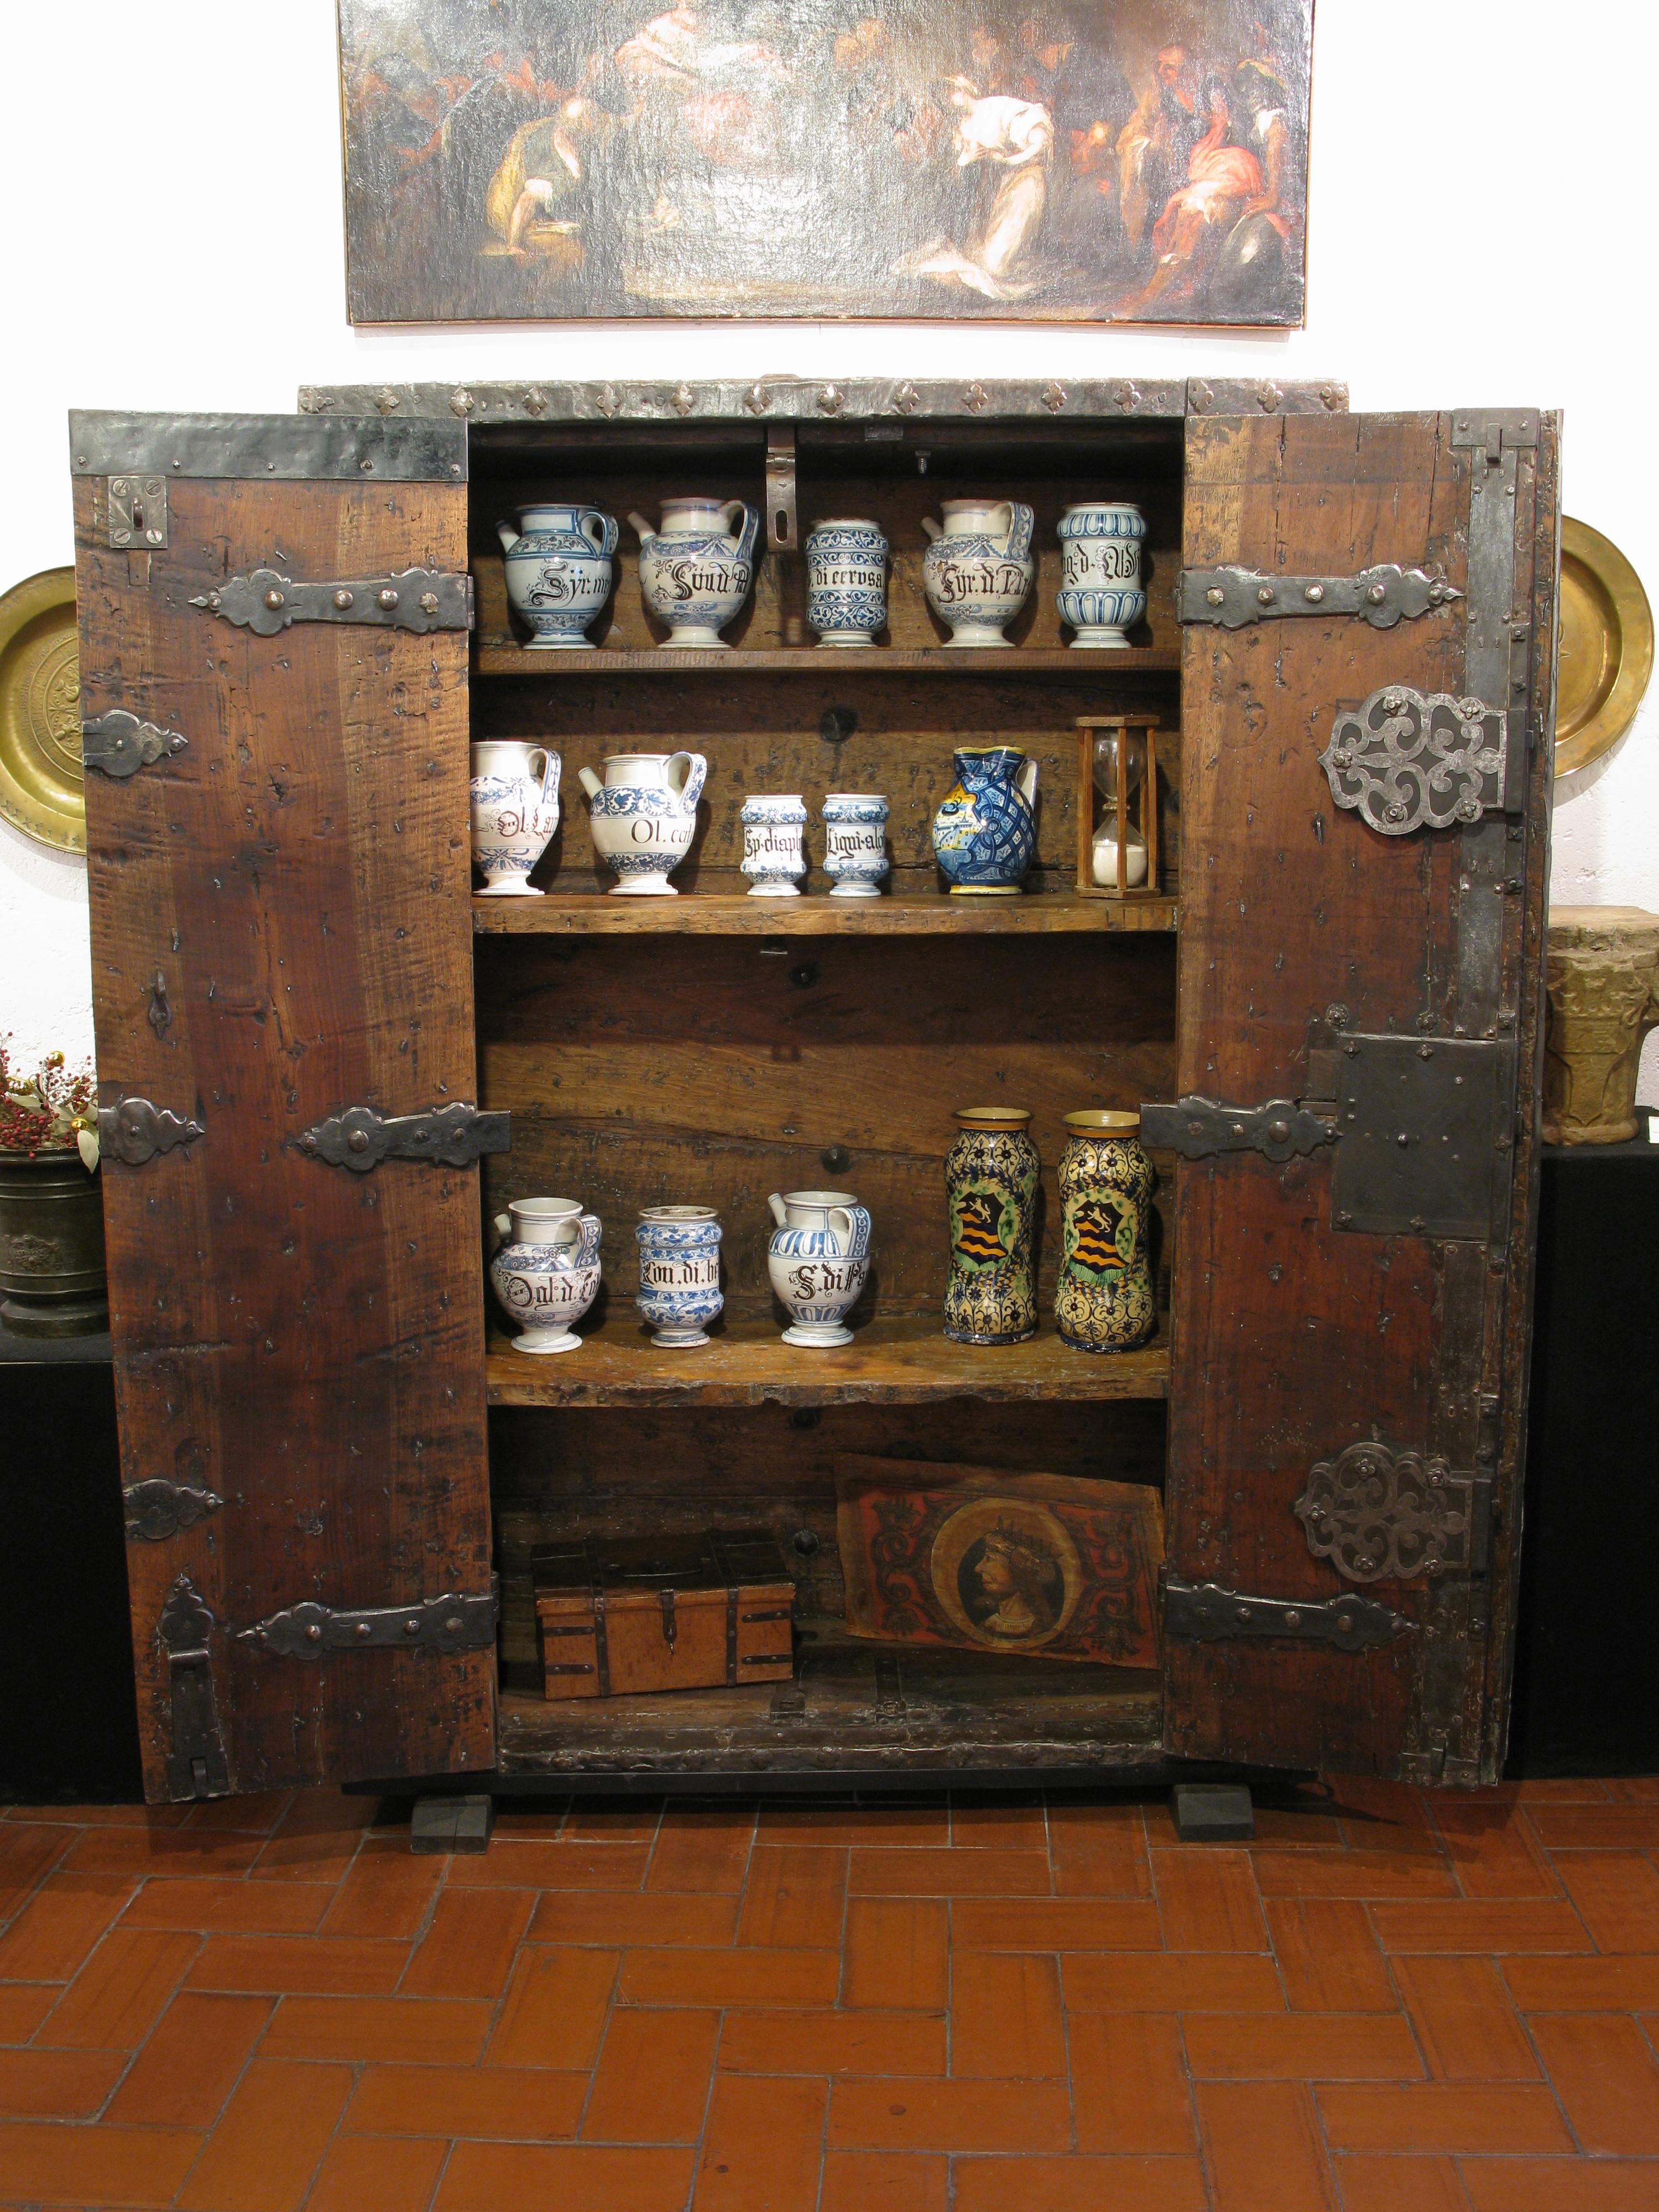 Antique Safe, Northern Italy, 17th Century For Sale 8